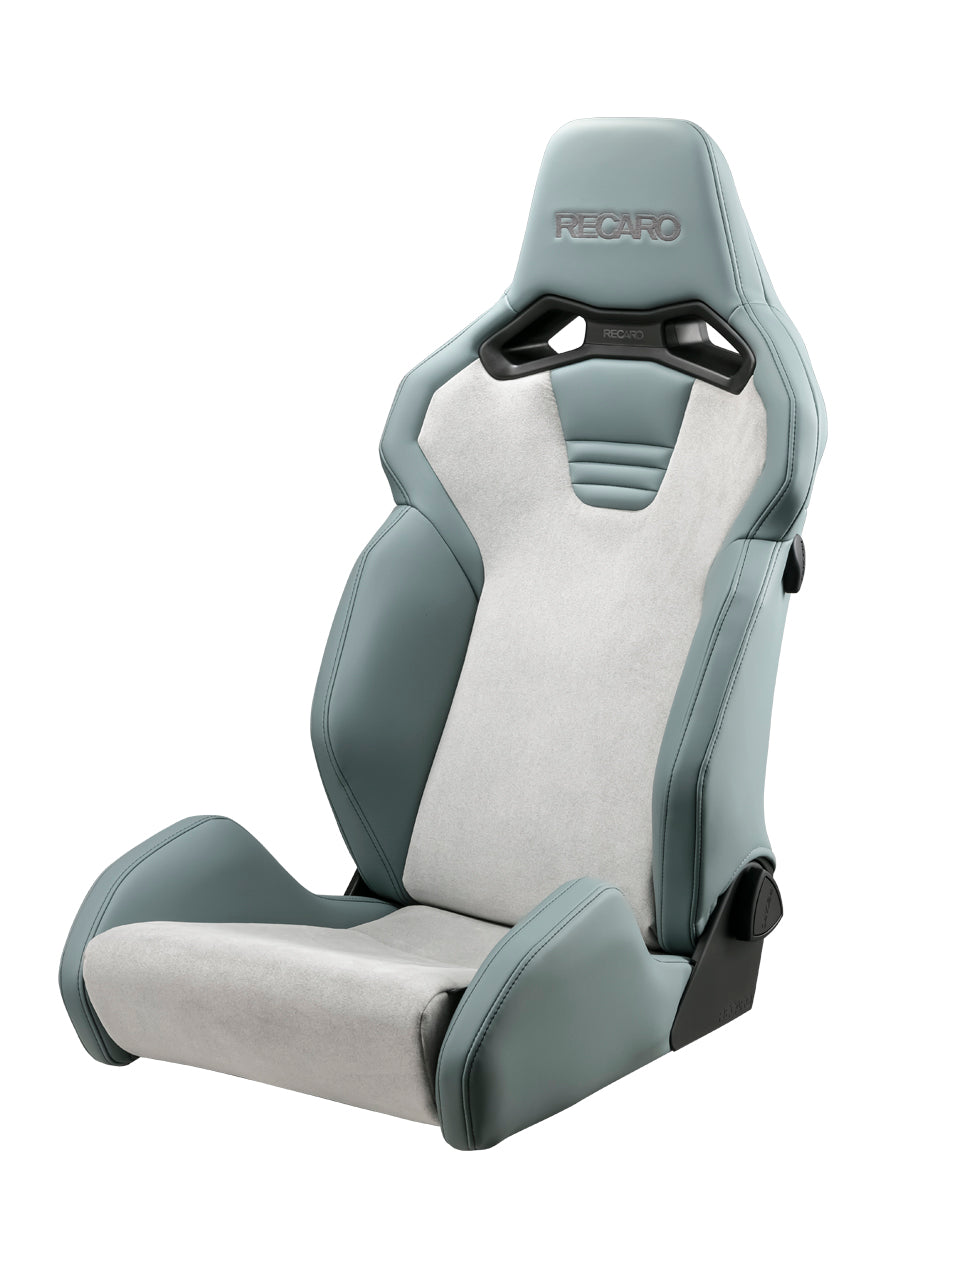 RECARO SR-S UT100 MG SG ULTRA SUEDE MELANGE GRAY AND ARTIFICIAL LEATHER GRAY COLOR WITH HEATED SEATS 81-120.21.648-0